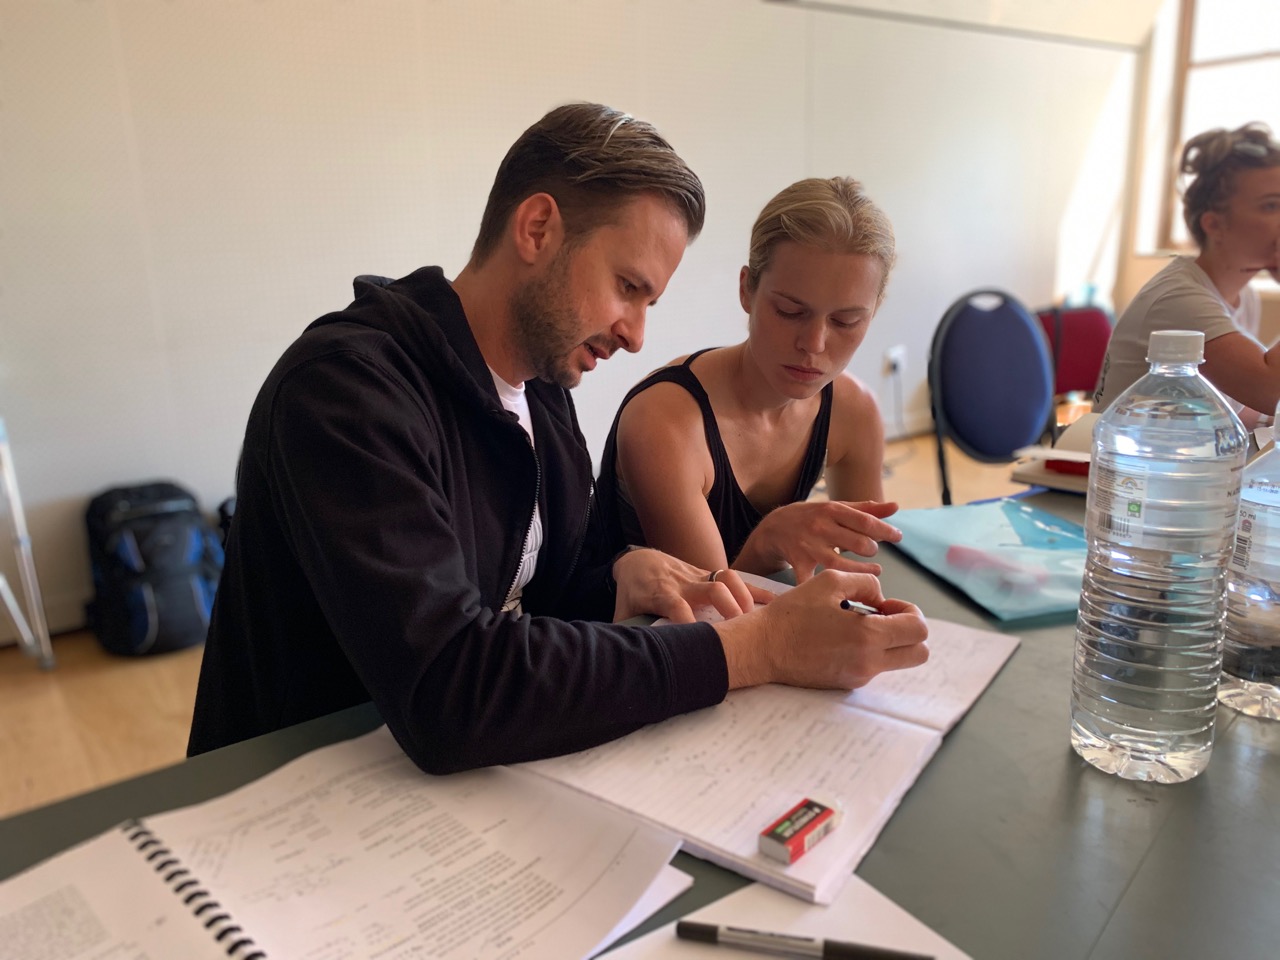 Choreography Duane Alexander consults with Mila De Biaggi during rehearsals for THE PRODUCERS